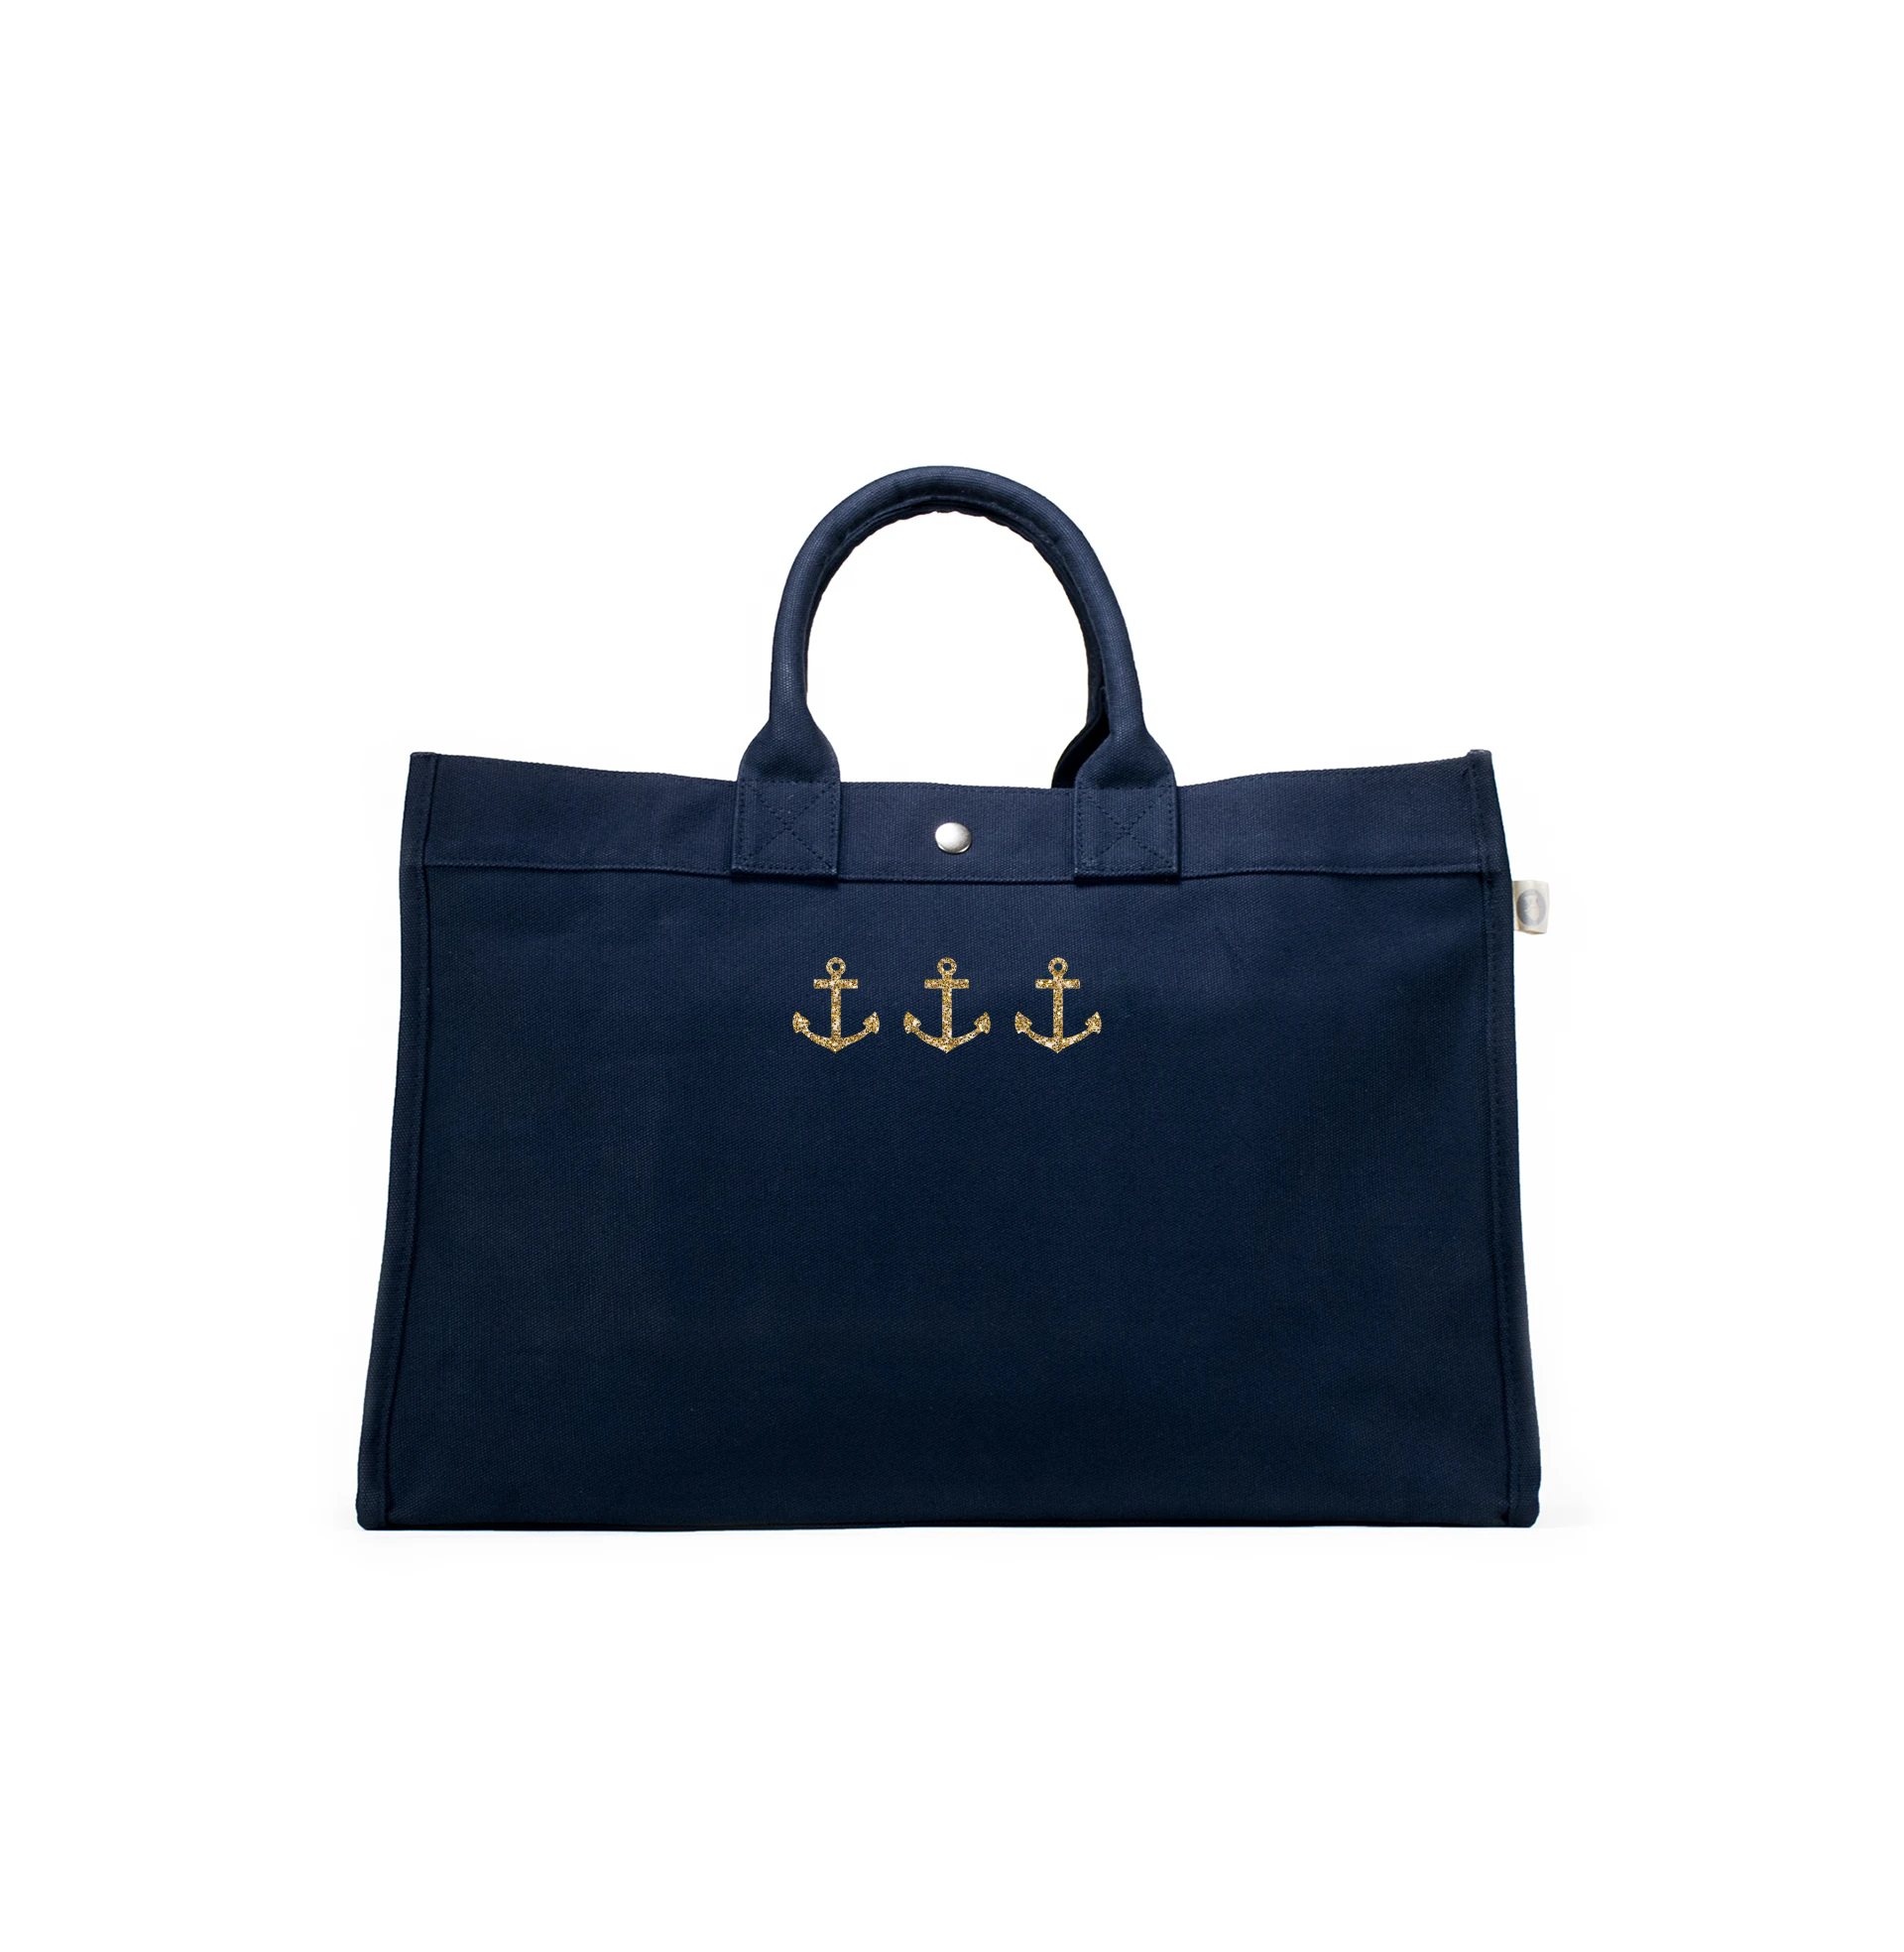 East West Bag: Navy with Gold Whale - Quilted Koala